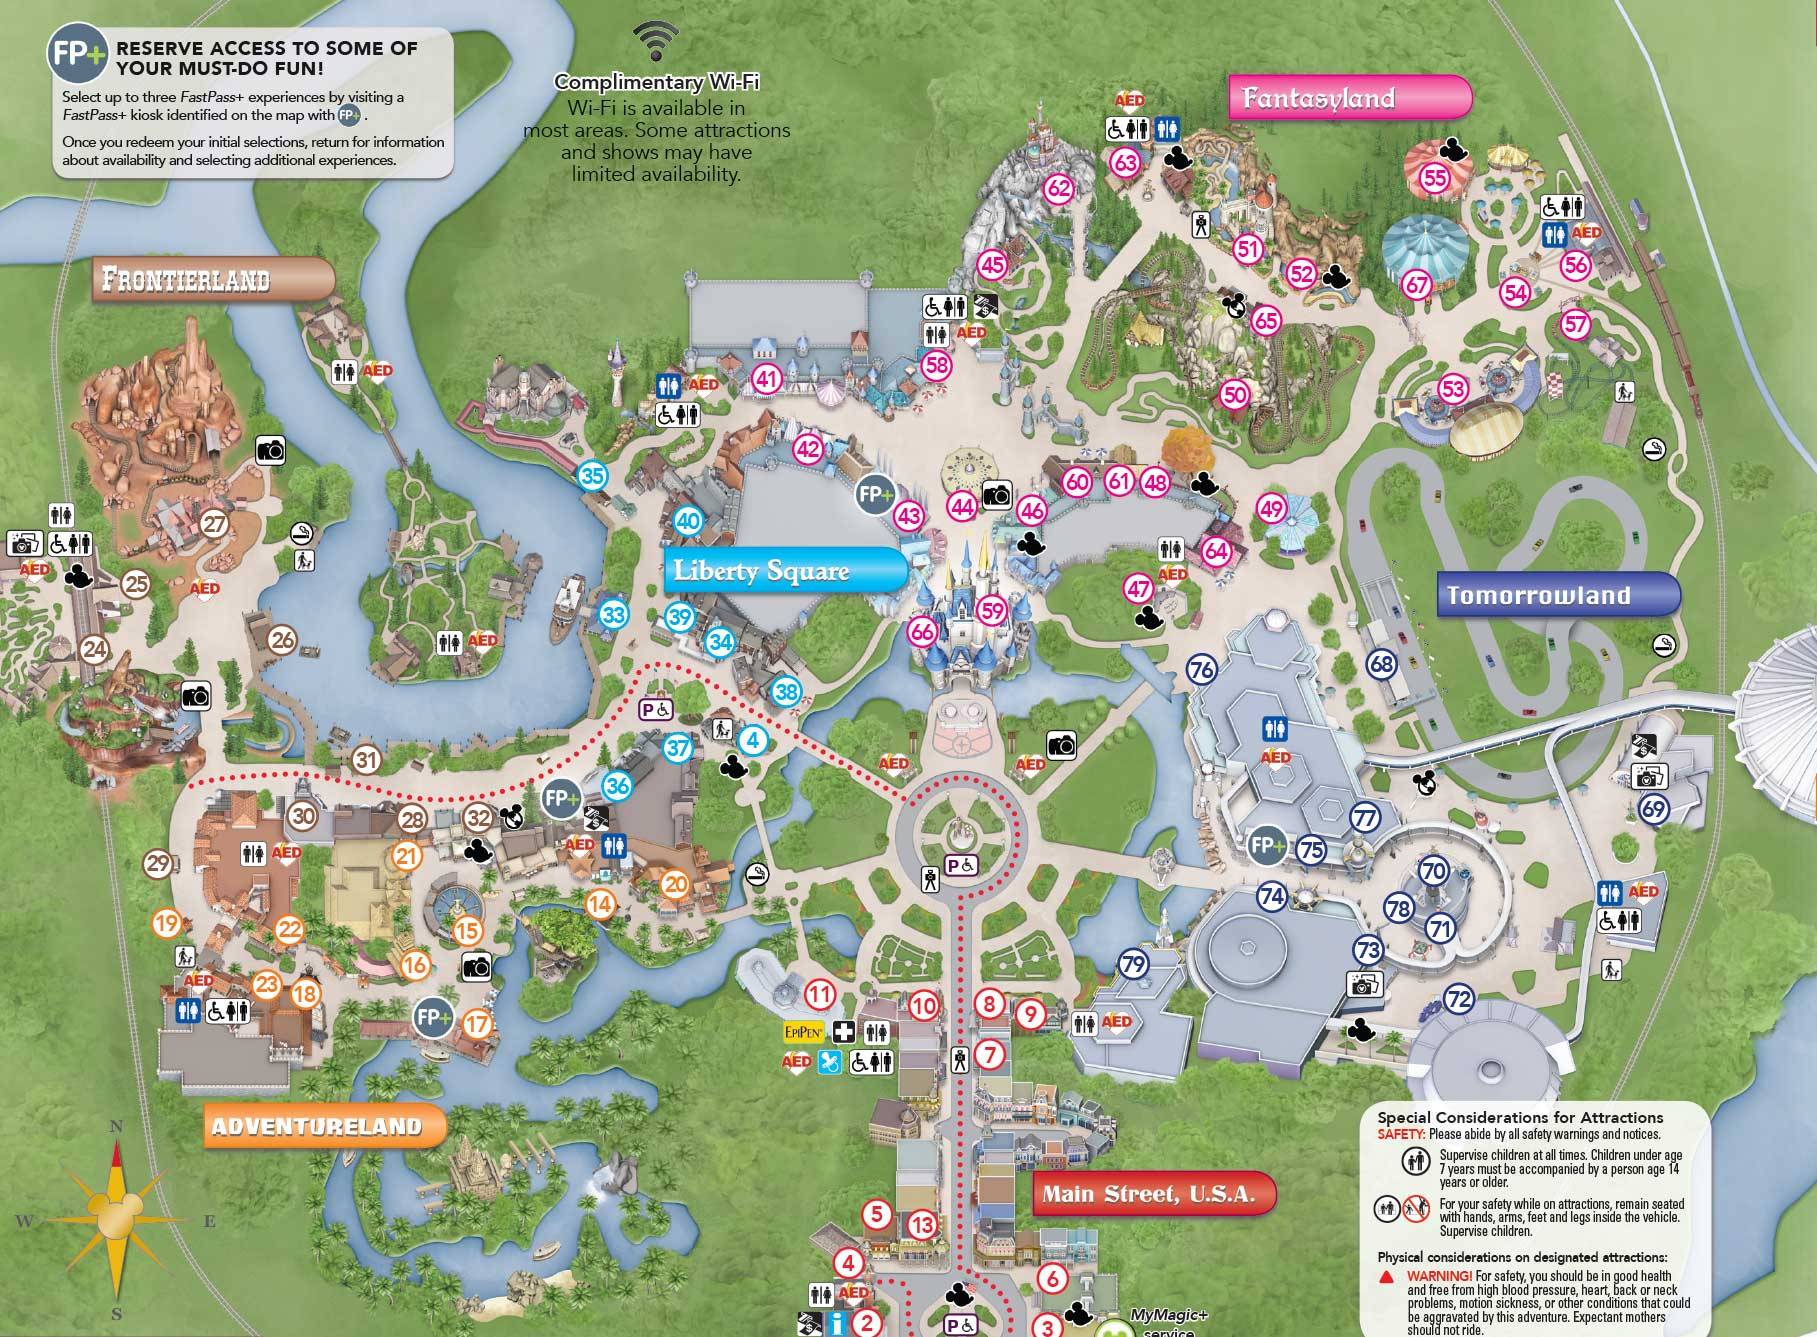 PHOTOS - New Magic Kingdom guide map shows changes to the hub area